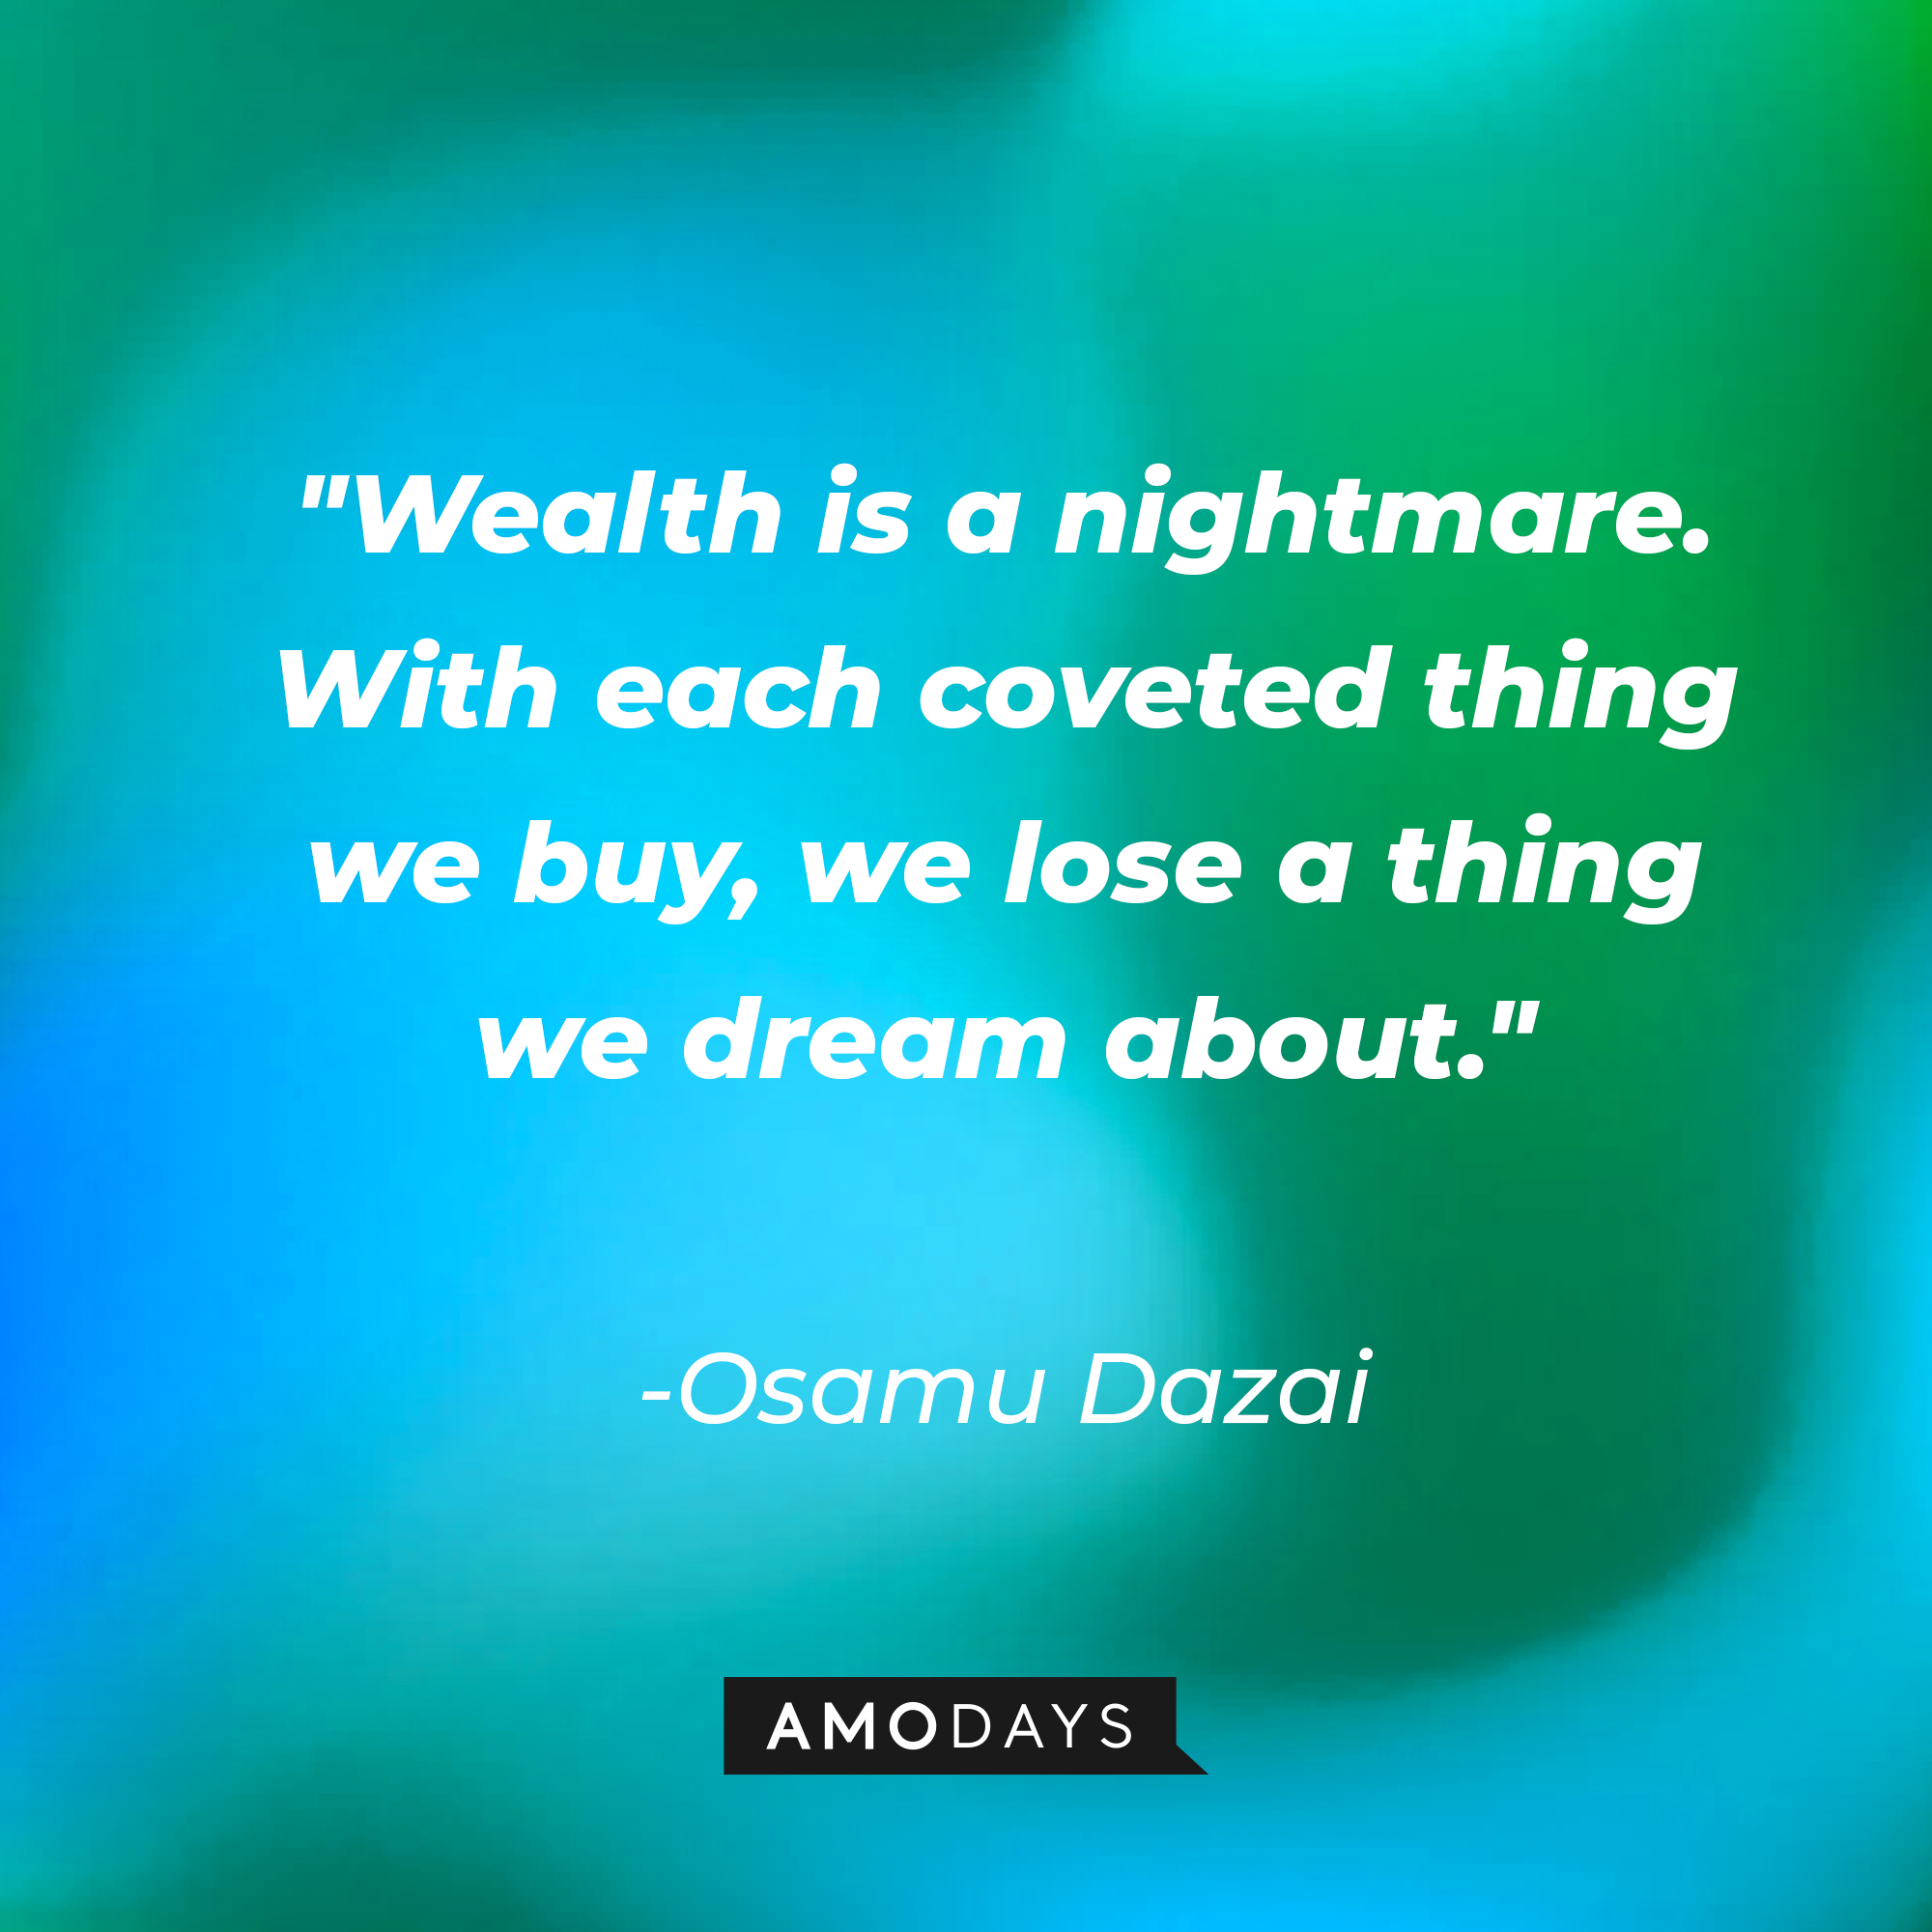 Osamu Dazai’s quote: "Wealth is a nightmare. With each coveted thing we buy, we lose a thing we dream about." | Source: AmoDays